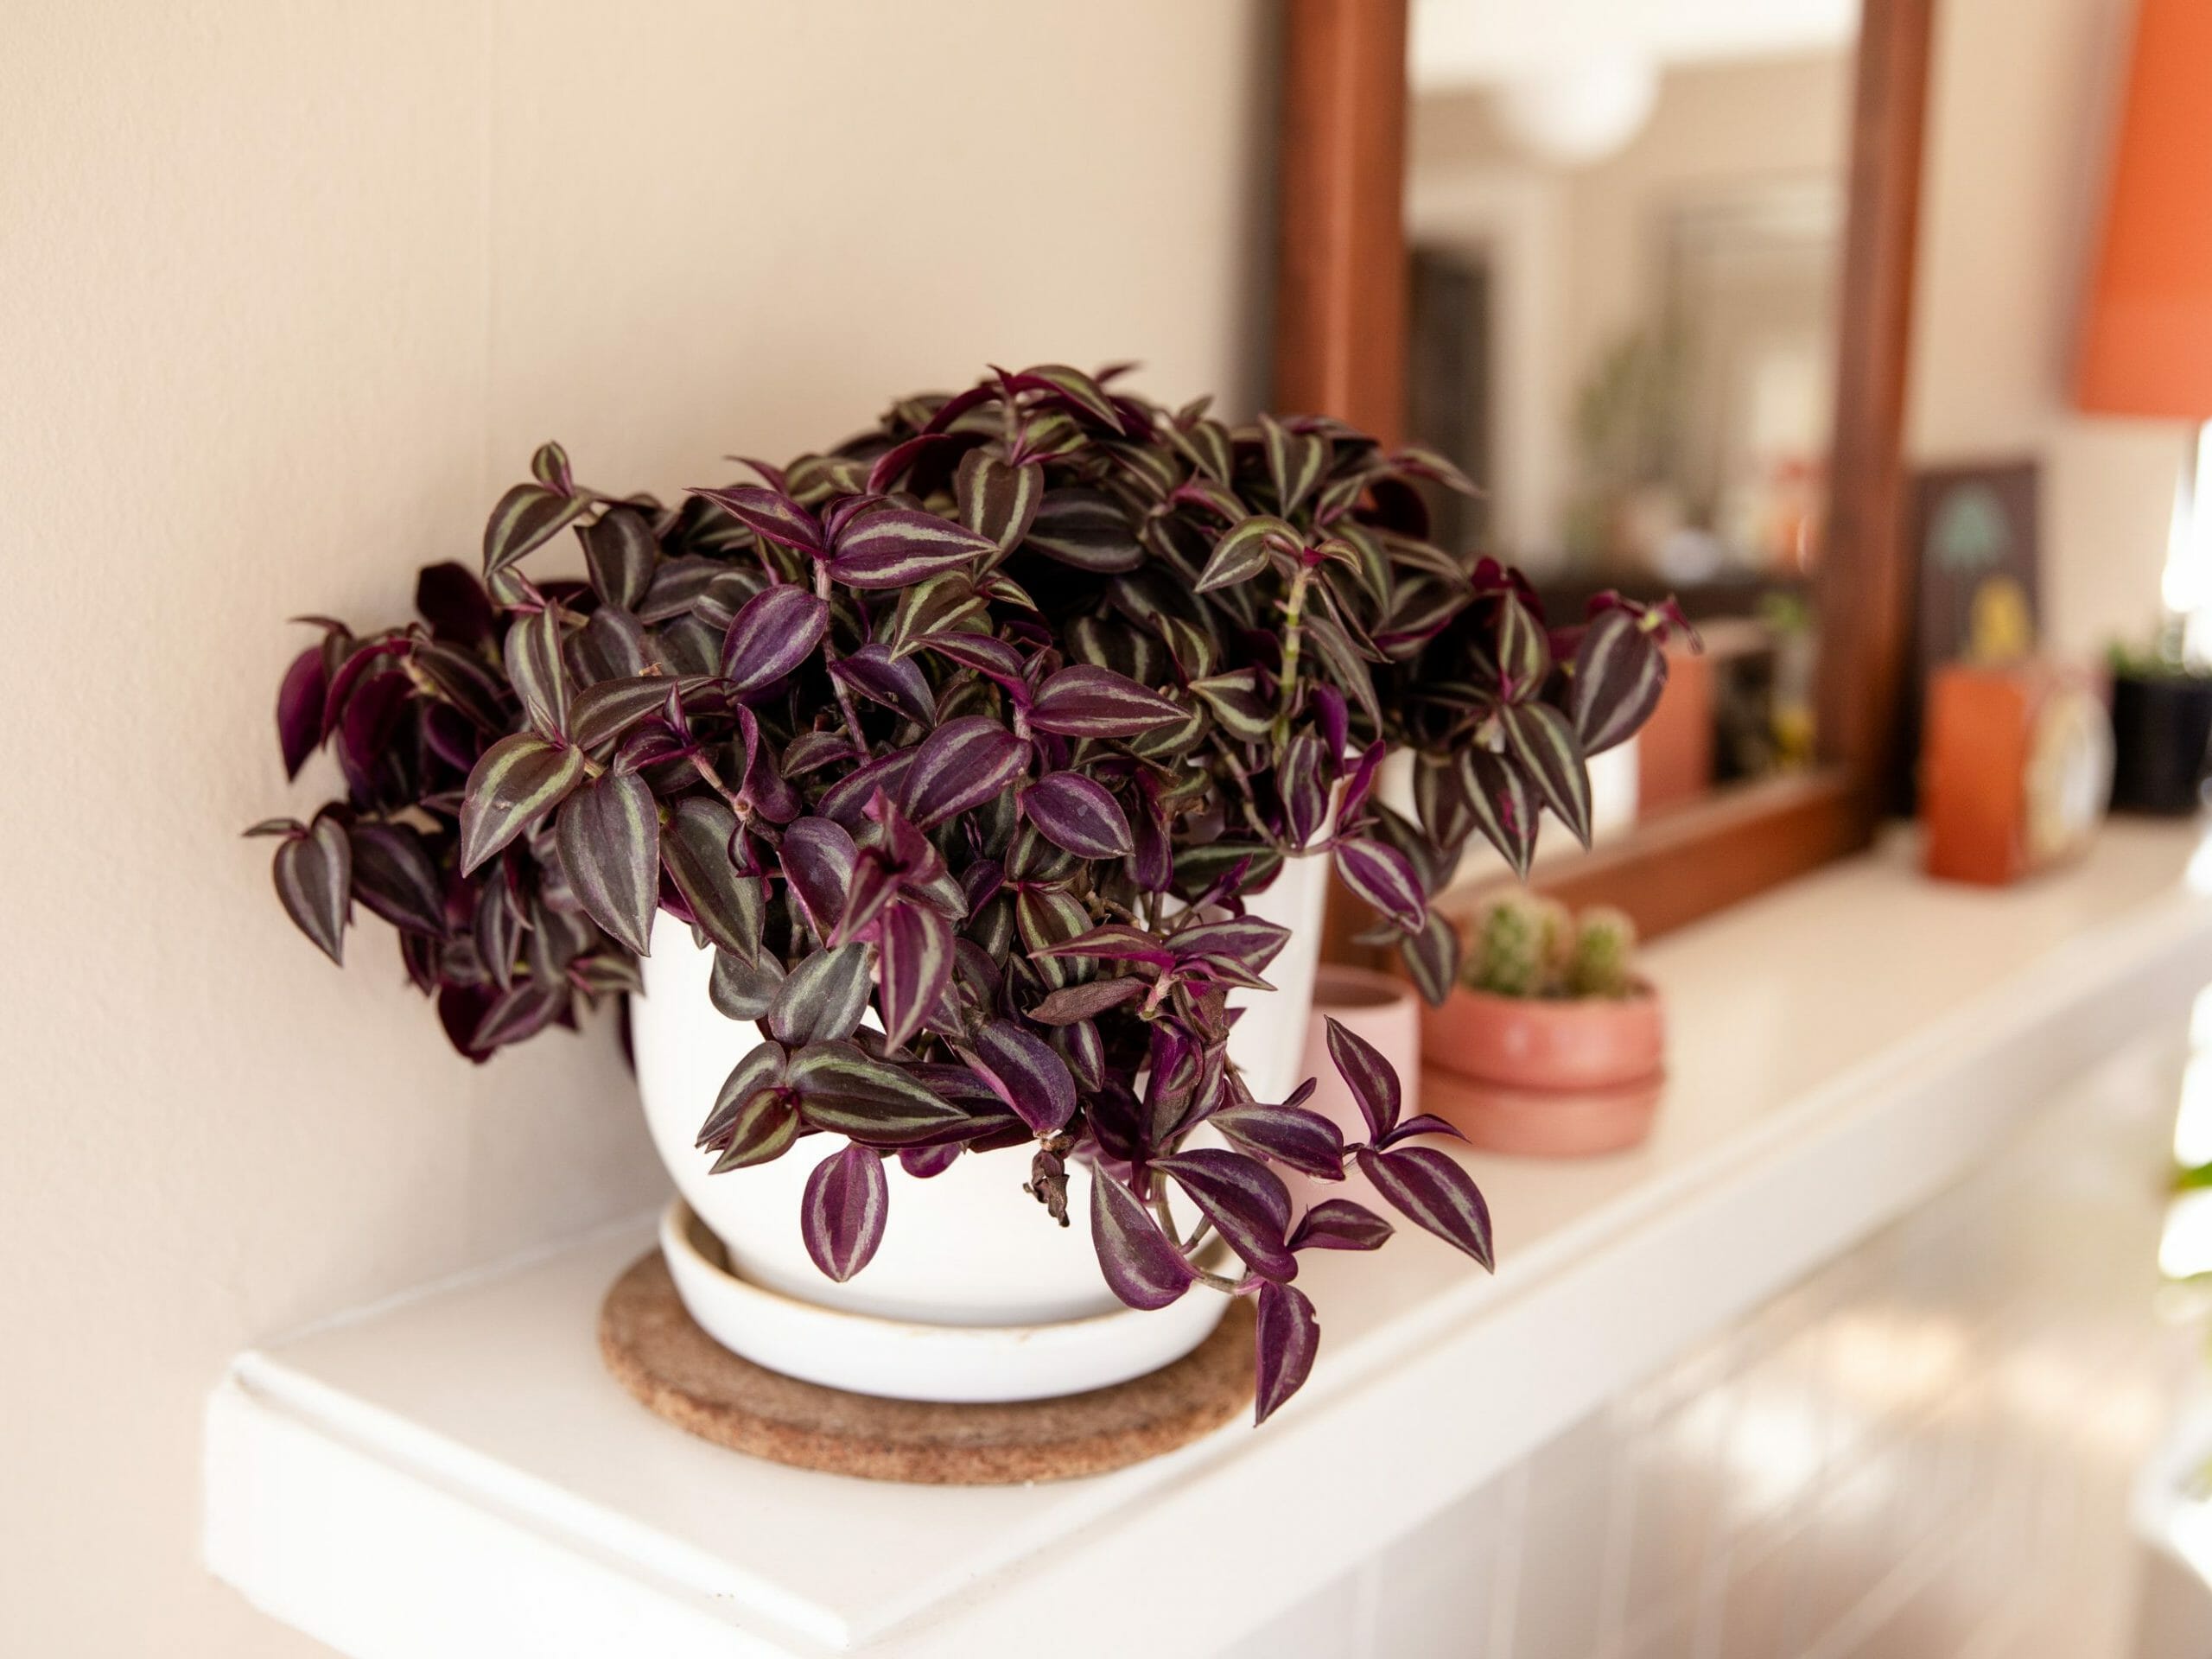 Is Wandering Jew Toxic To Cats?